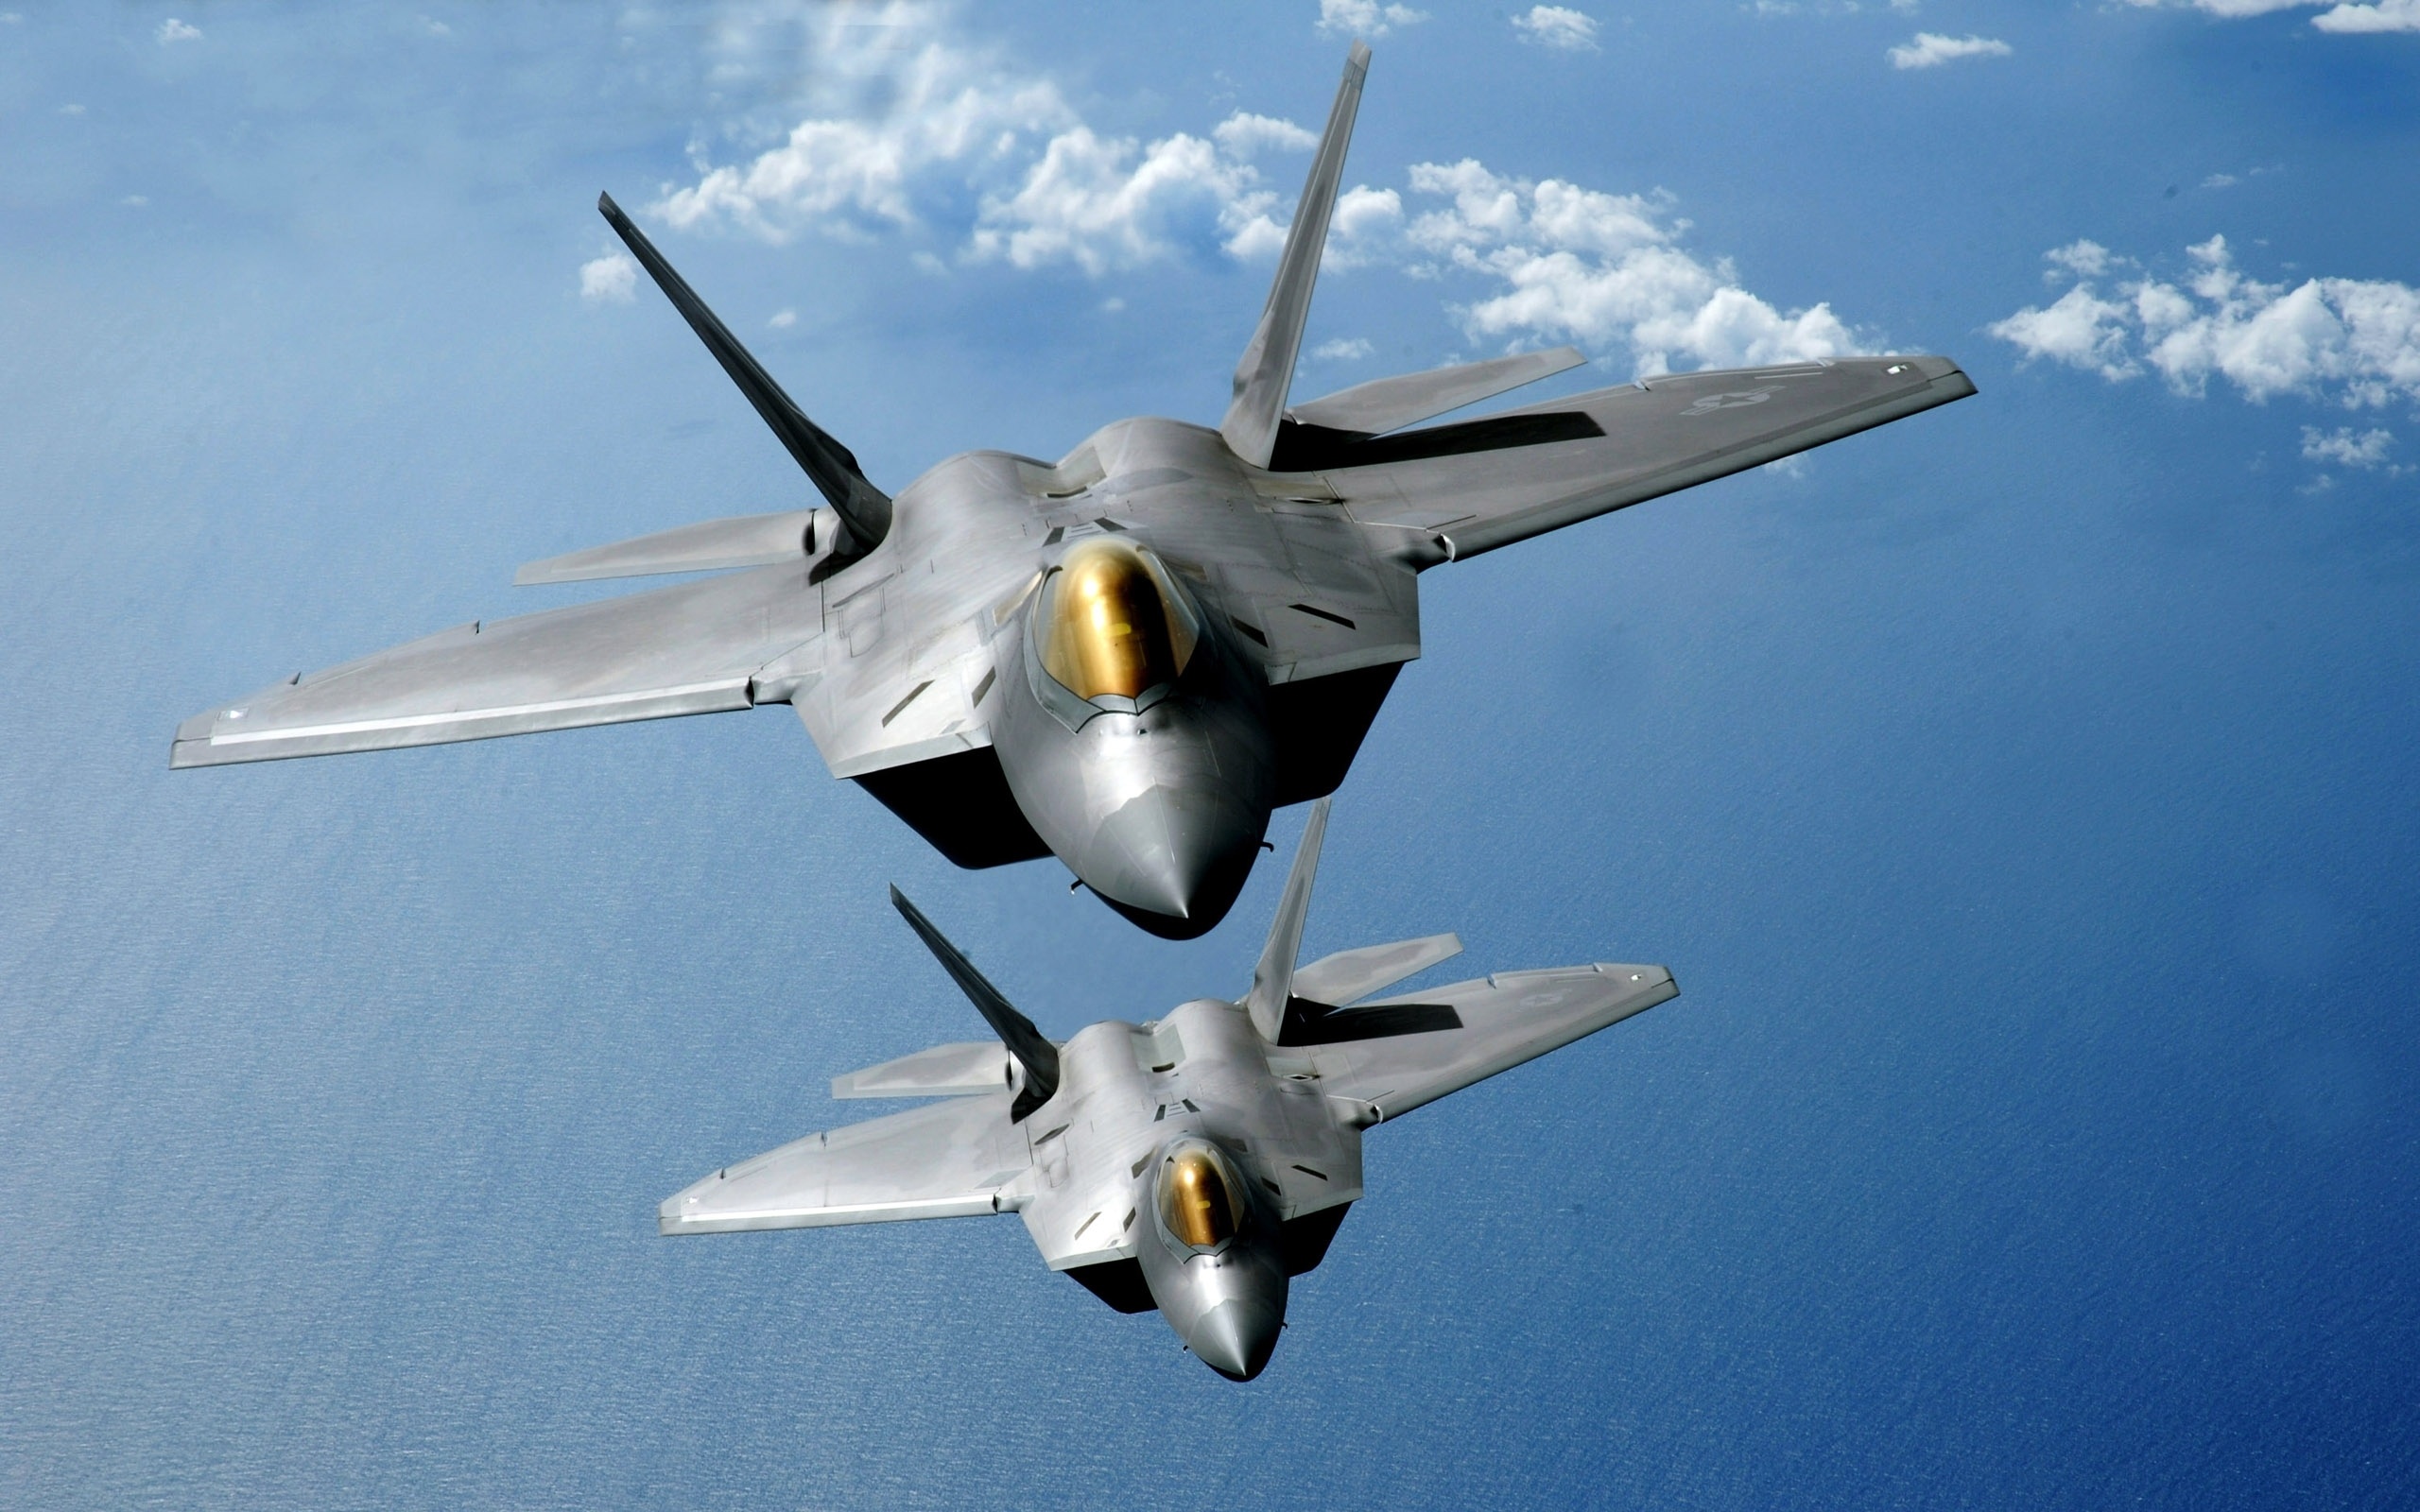 Lockheed Martin, Mobile wallpaper, Airplanes, Download the picture, 2560x1600 HD Desktop